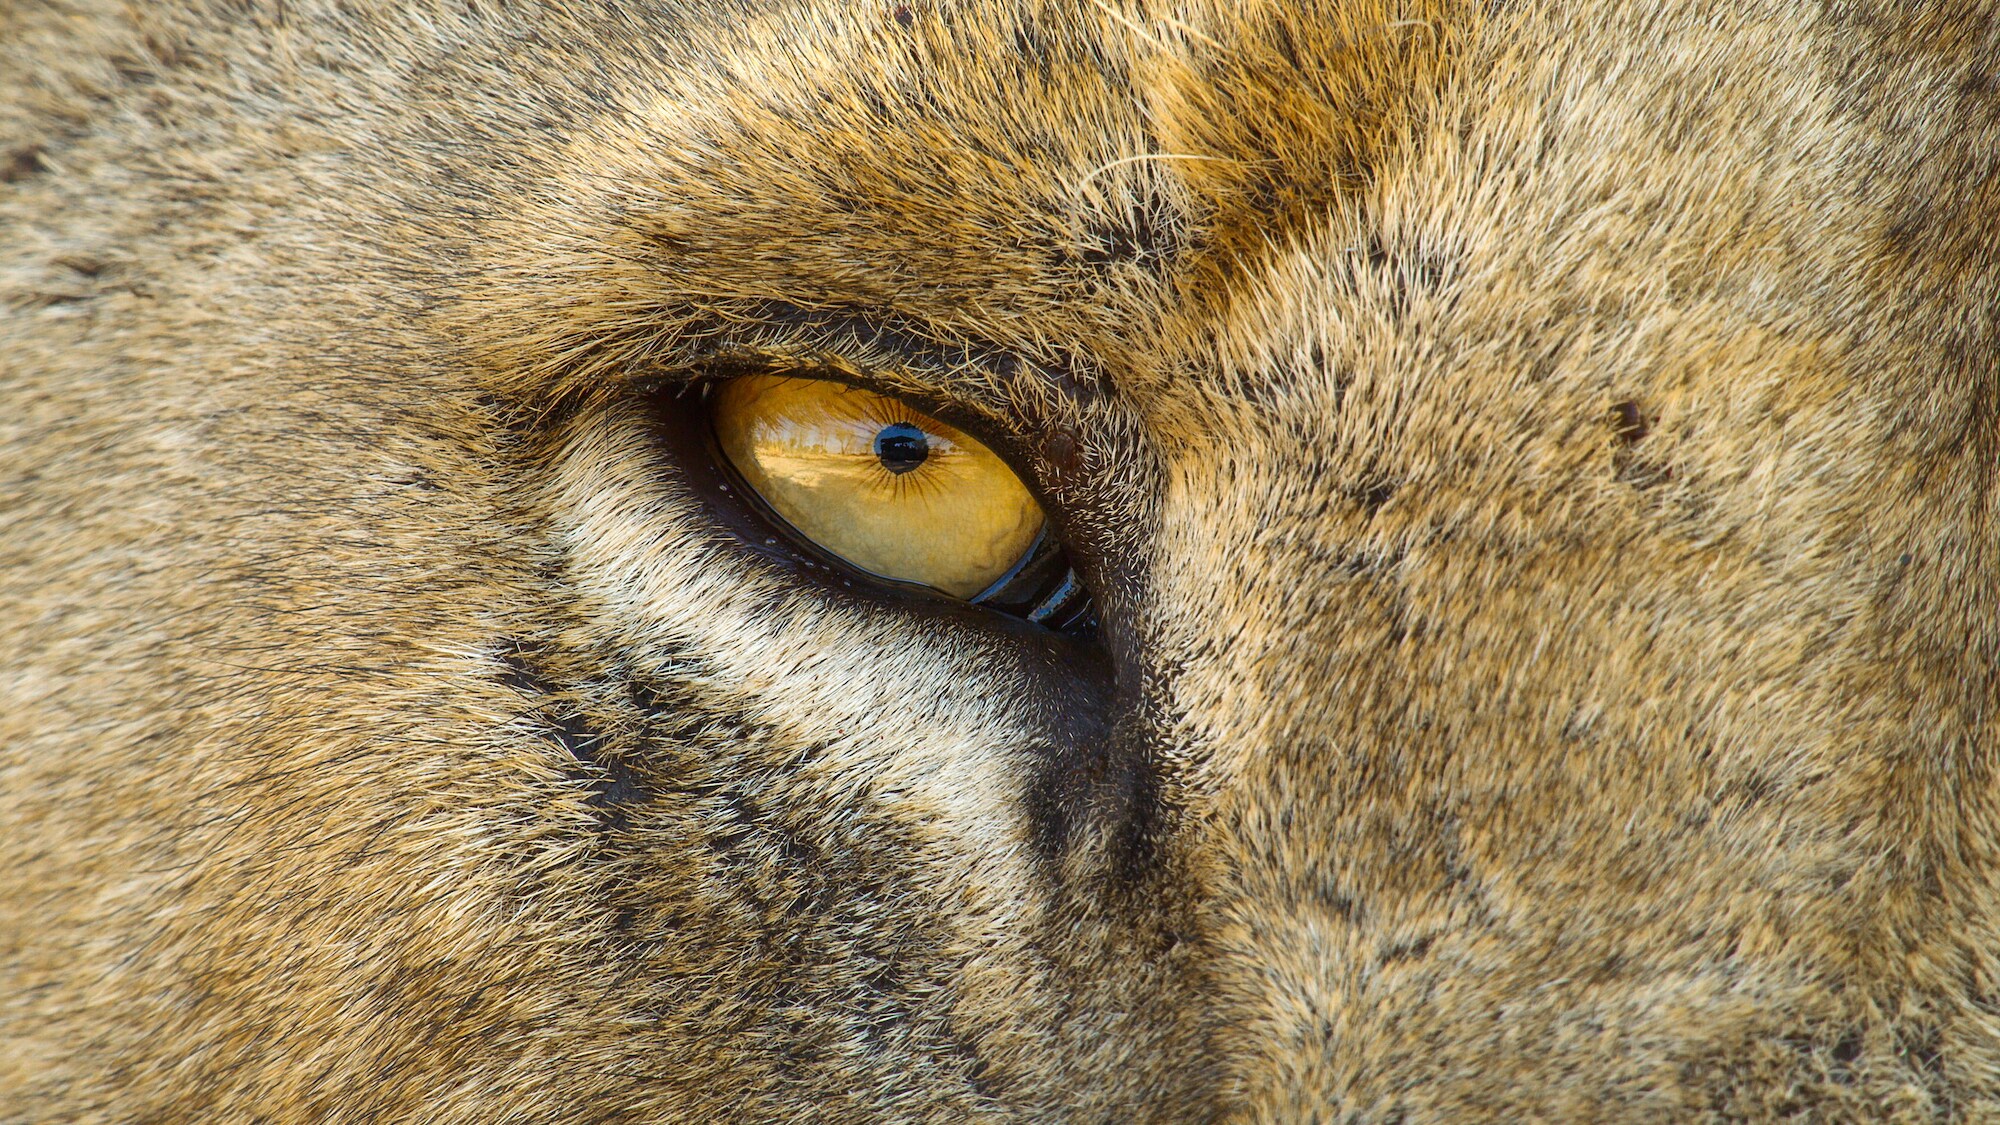 A close up of a lioness eye. (Credit: National Geographic/Bertie Gregory for Disney+)